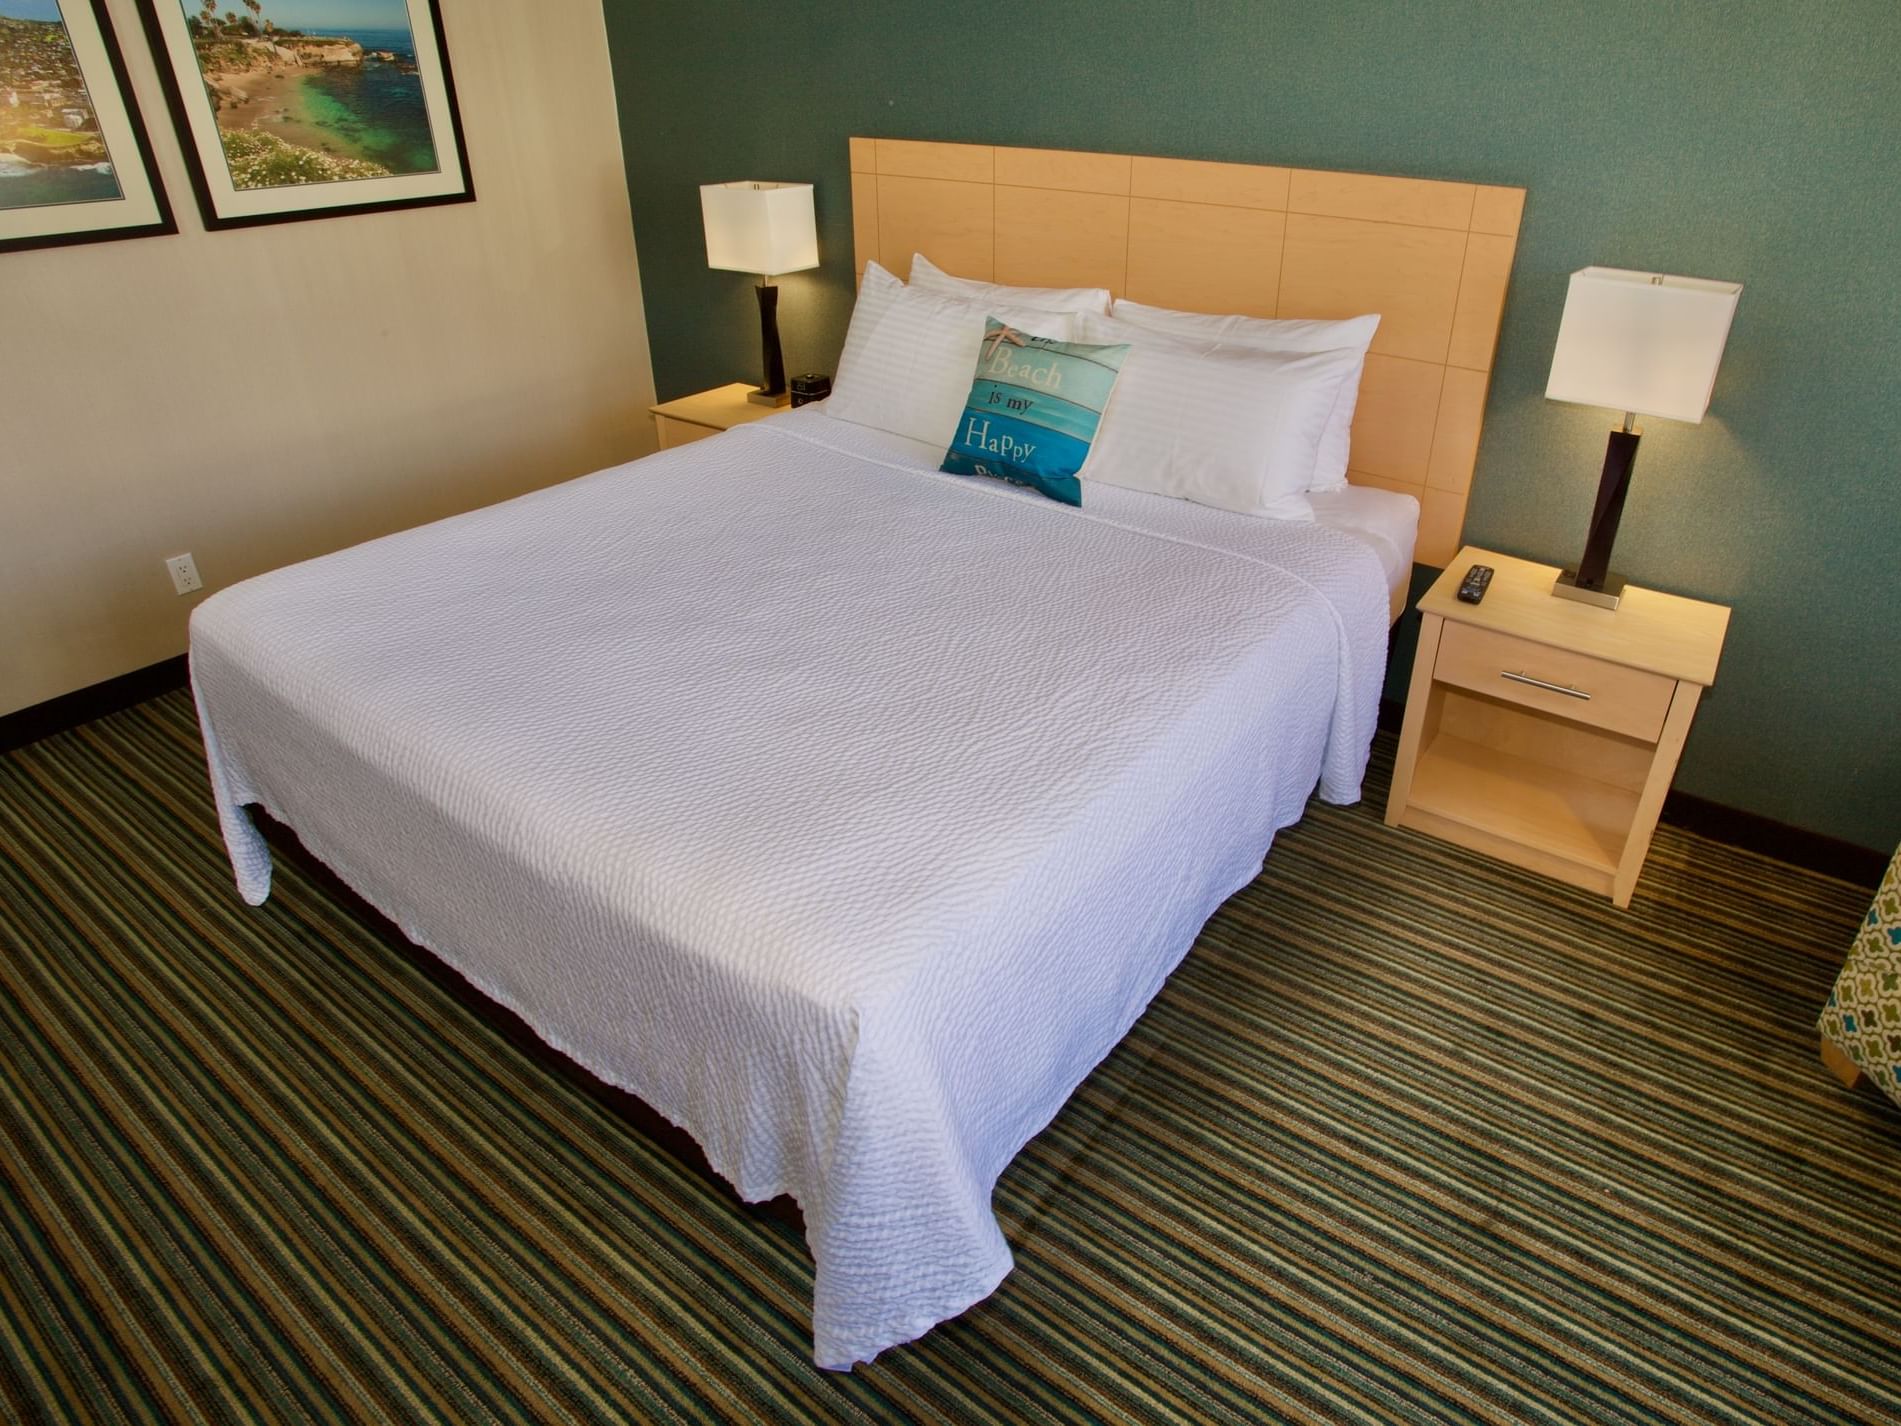 Bed, lamps & nightstand, King Room, Inn by the Sea at La Jolla